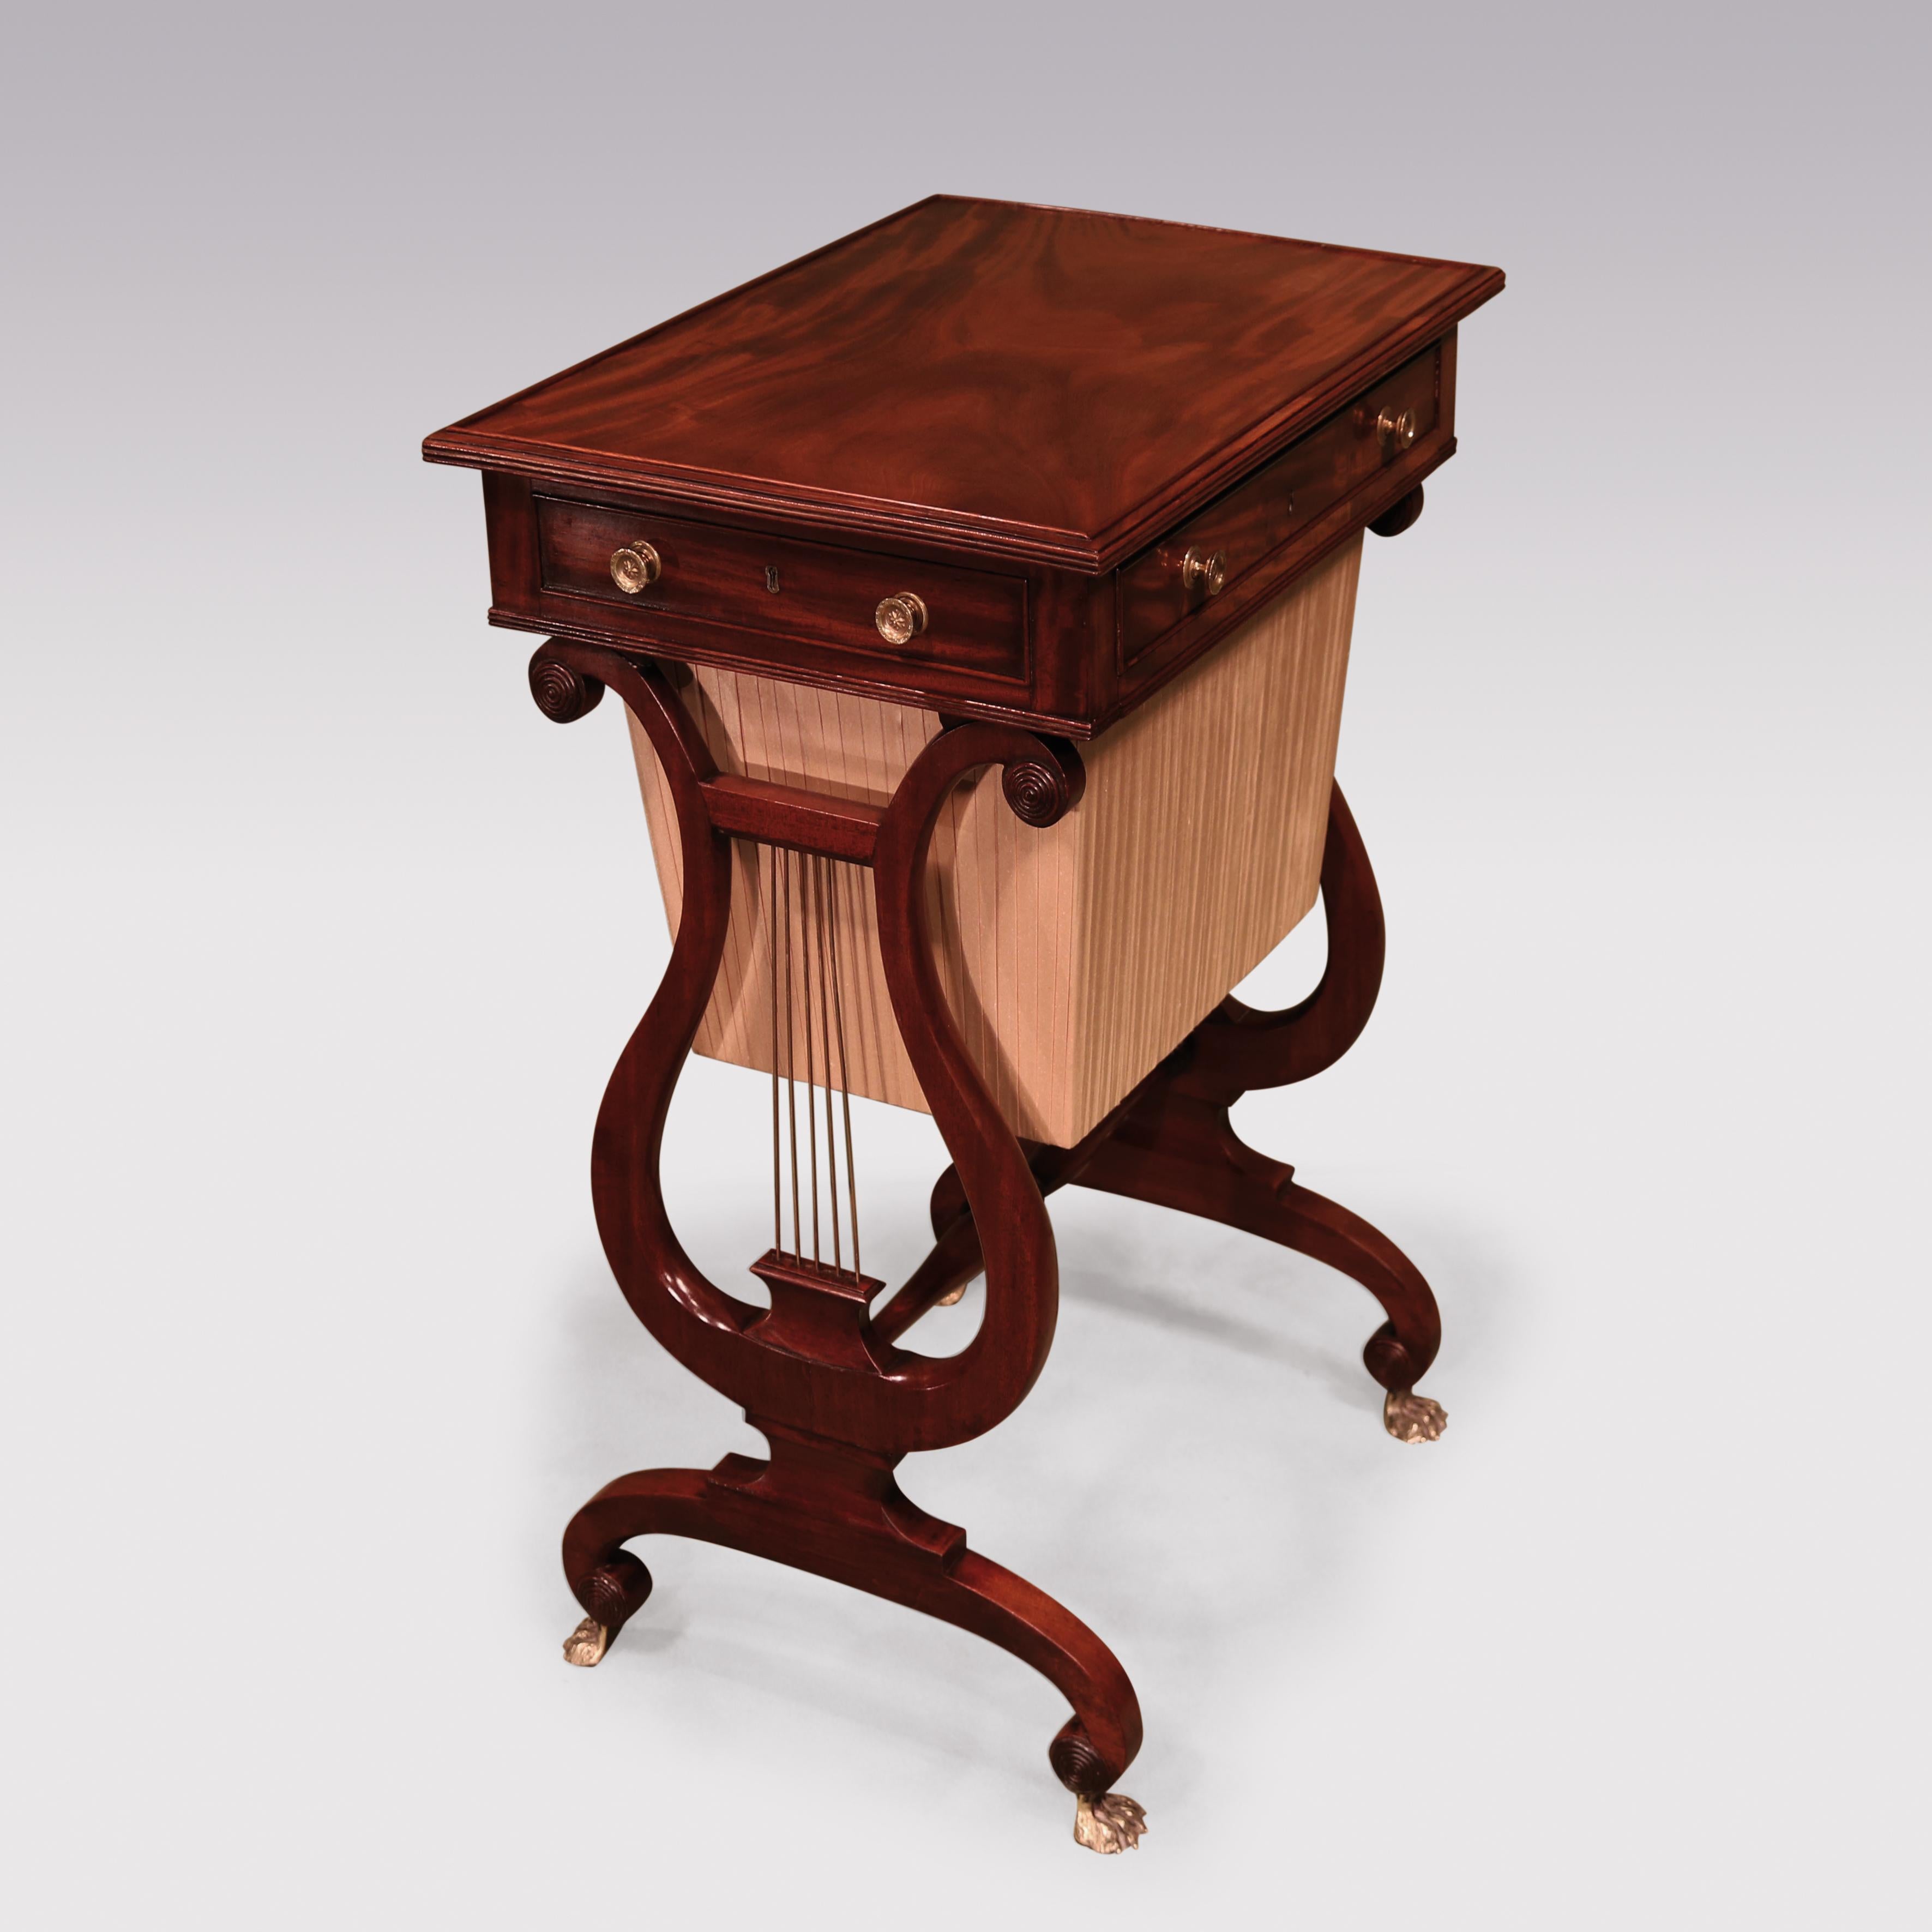 An early 19th century Regency period figured mahogany work table, having rectangular reeded edged top above 1 opening and 3 dummy cockbeaded drawers, raised on lyre end supports with central turned stretcher ending on umbrella shaped scroll legs